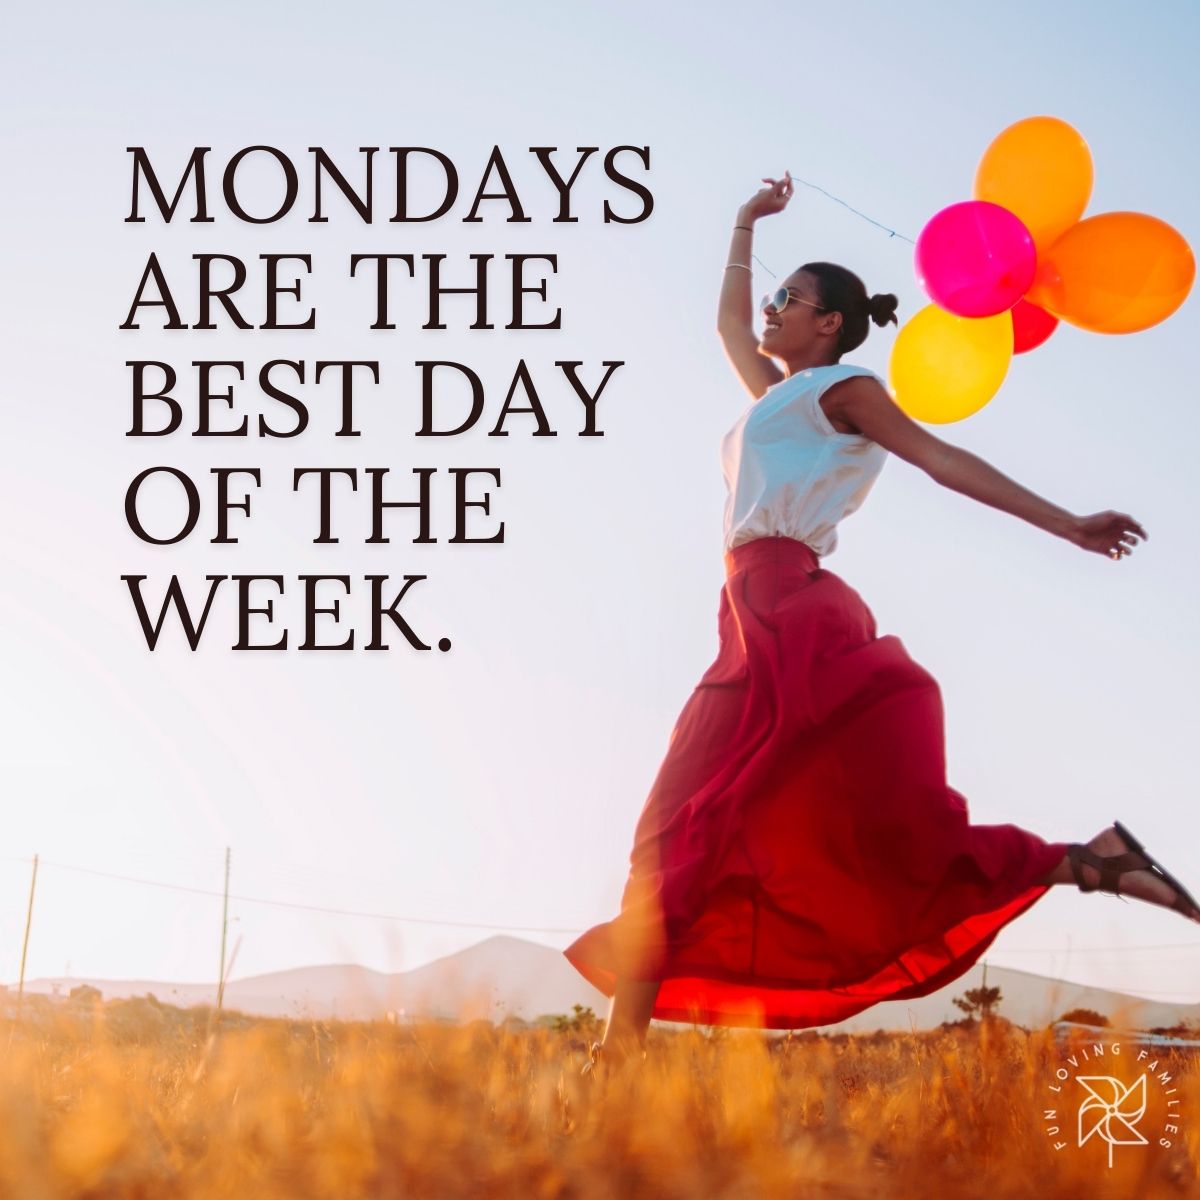 Mondays are the best day of the week affirmation image